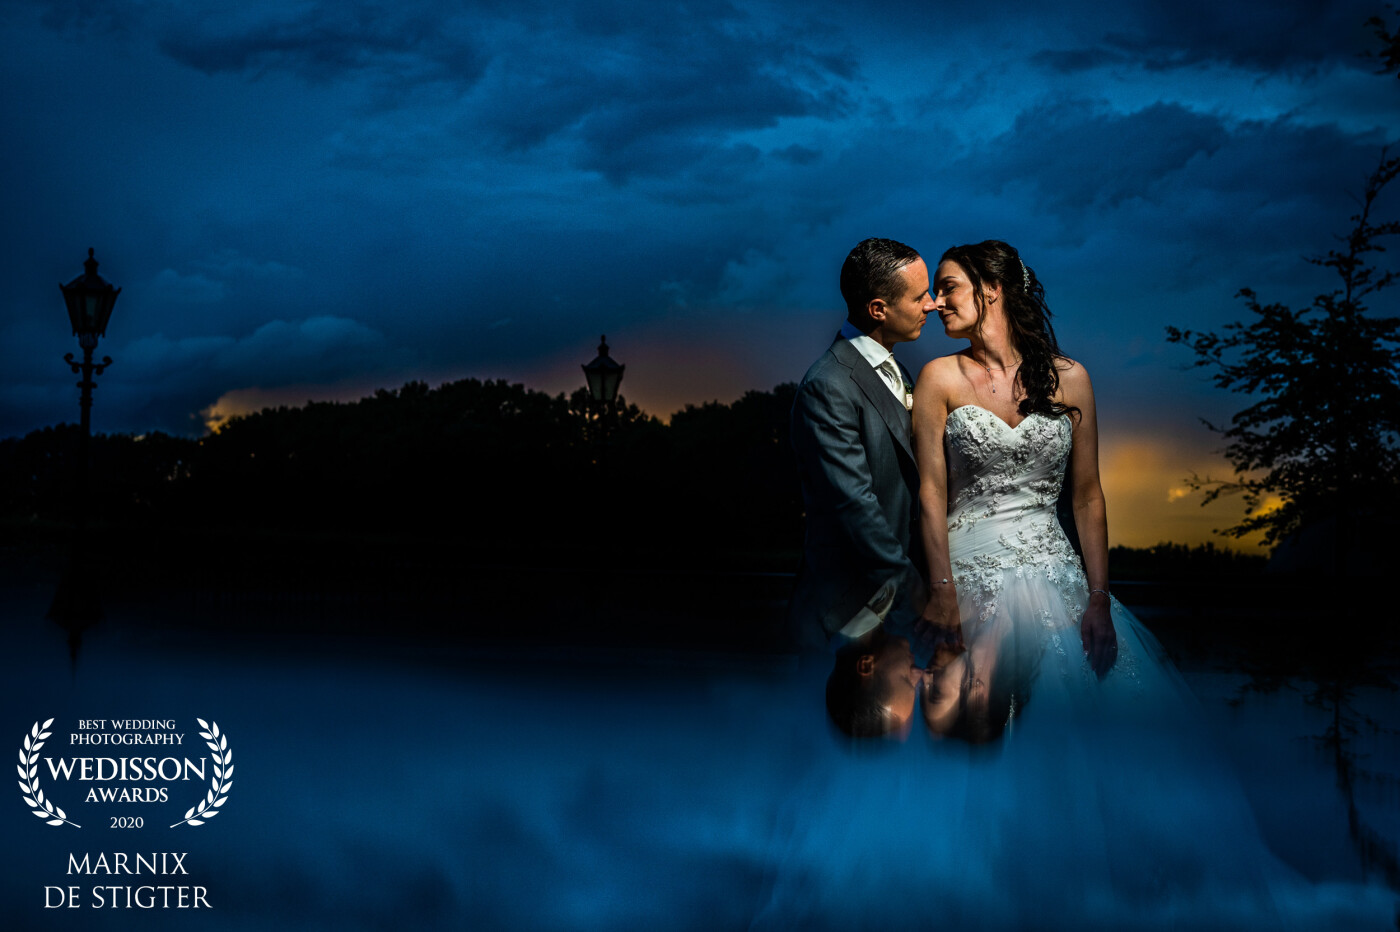 Just a few moments after the sun had set behind the trees we took a moment for some shots which showed the beautiful environment where this couple got married. To emphasize the dramatic blue skies I used a mirrored surface to give the image a more dreamy feel.